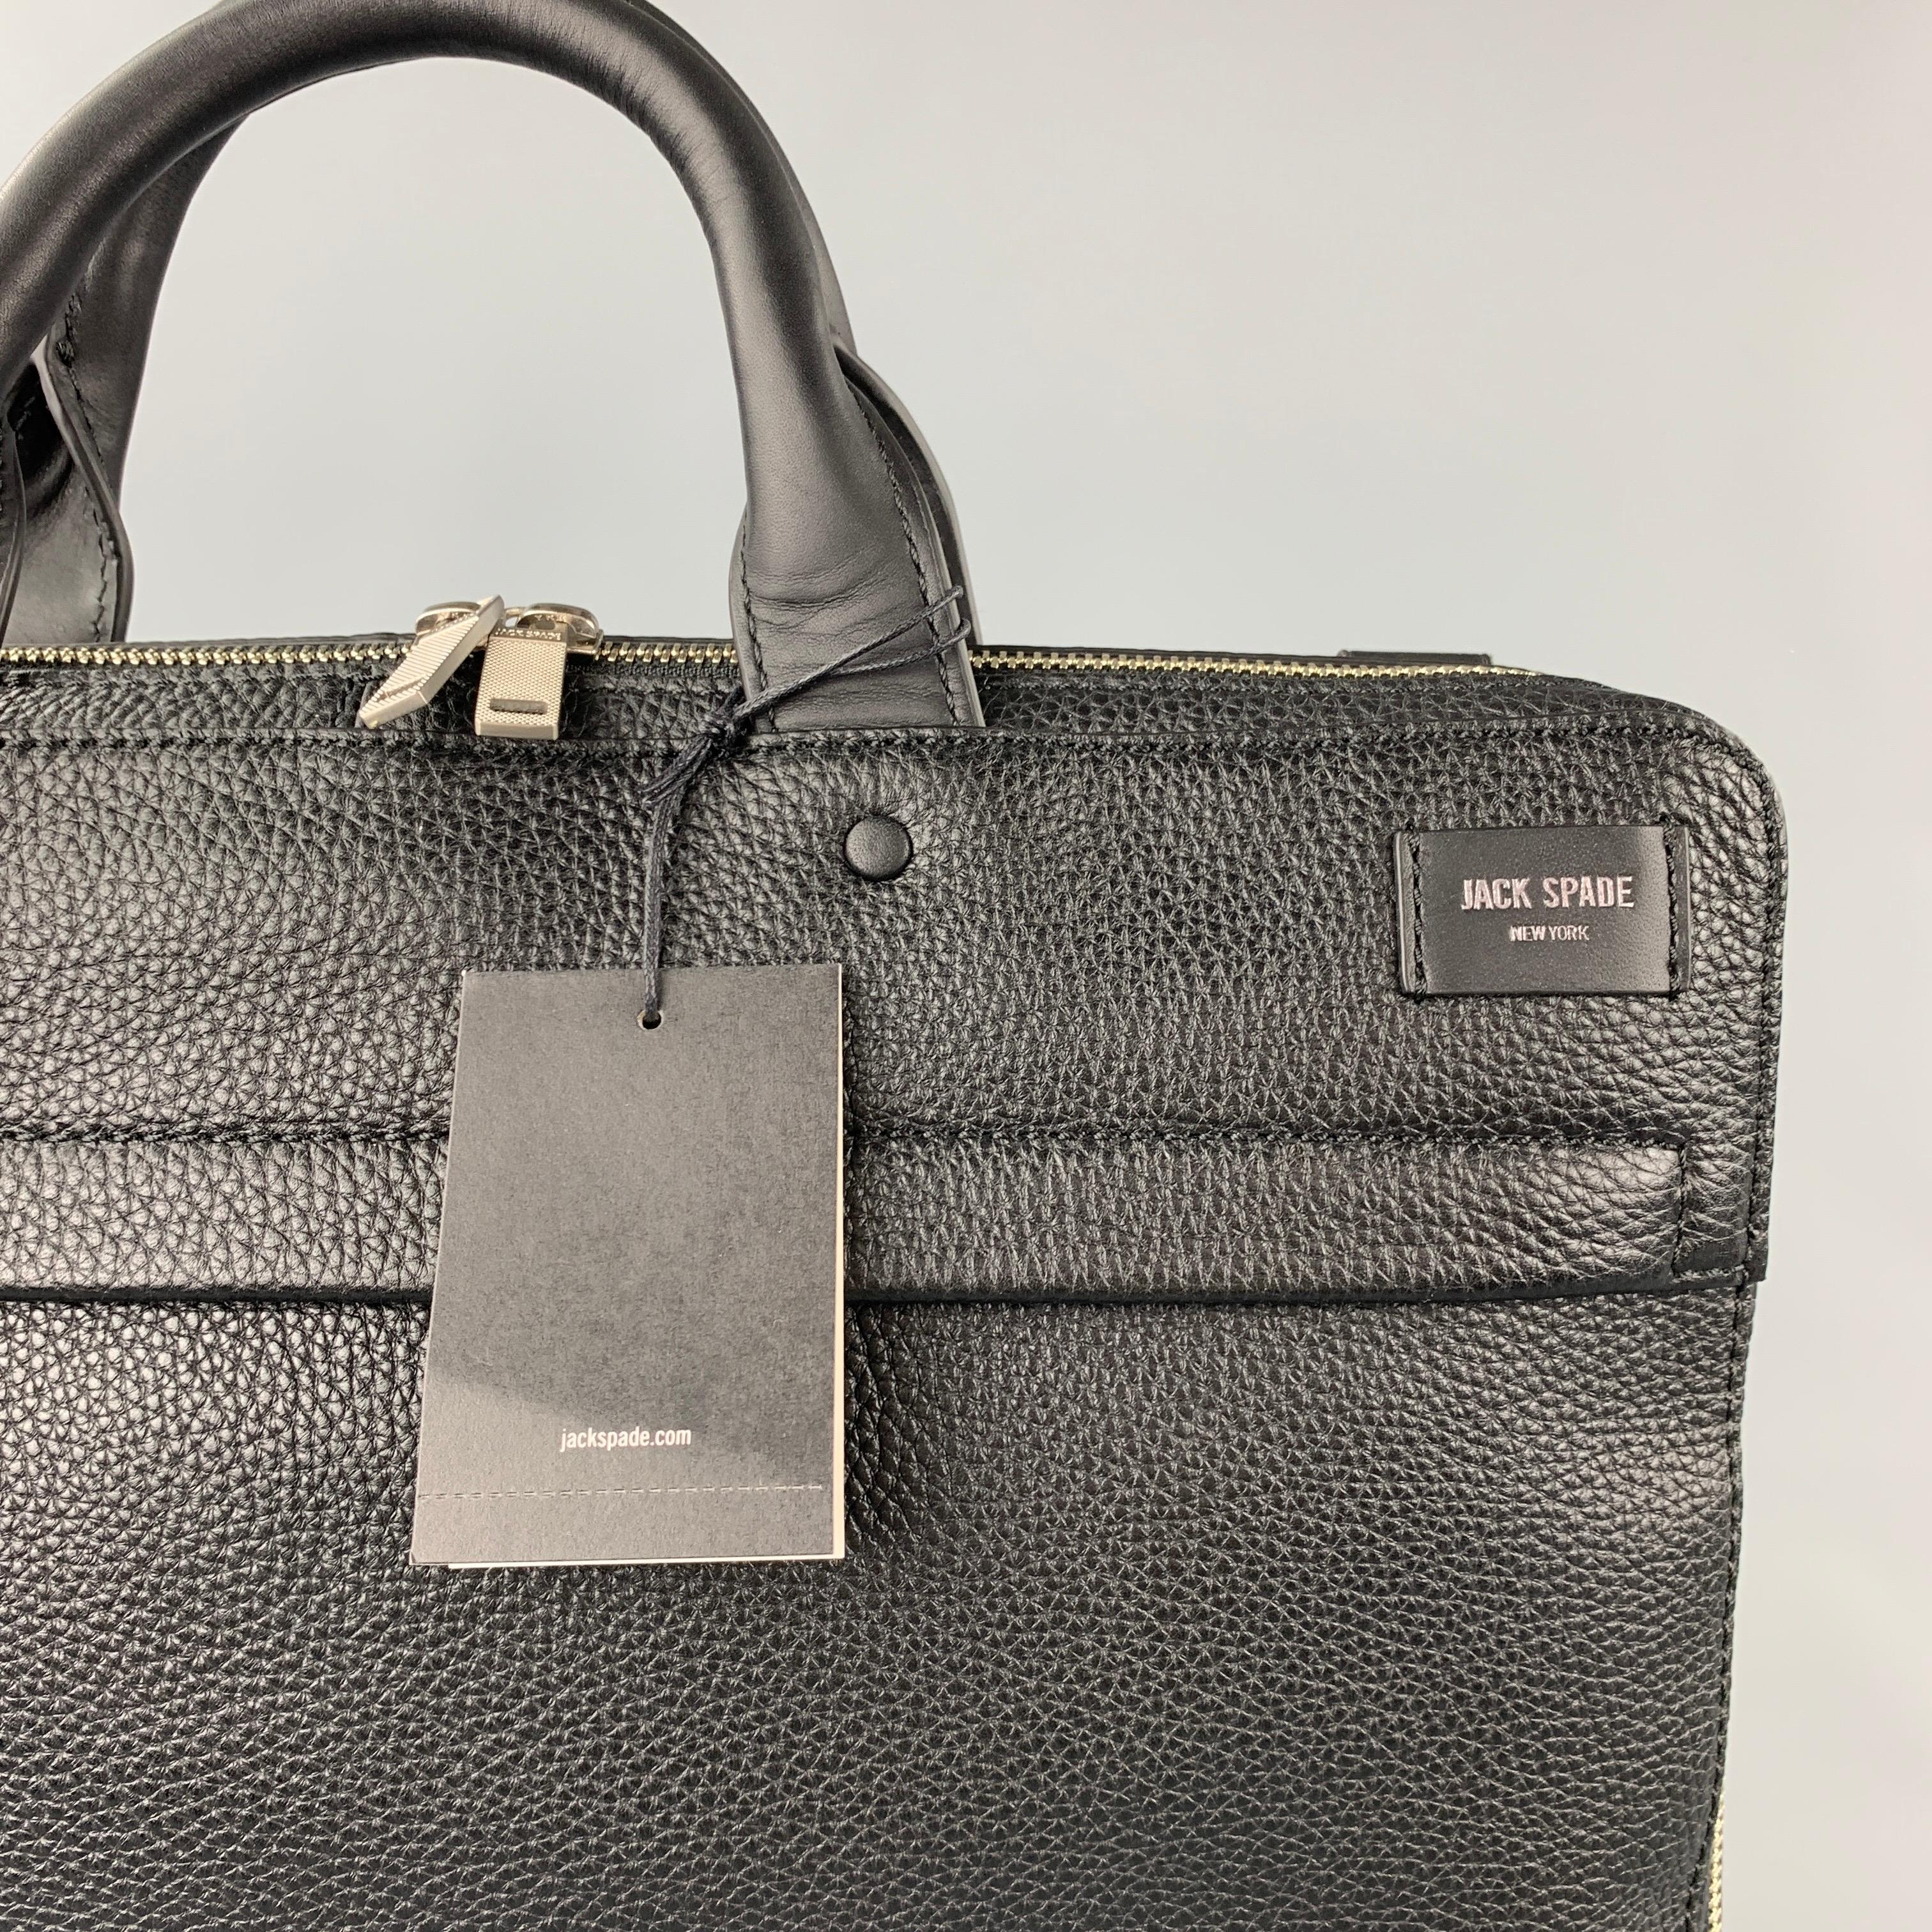 JACK SPADE laptop bag comes in a black pebble grain leather with a khaki interior featuring a shoulder strap, top handles, inner slots, and a zip up closure. Comes with dust bag.

Brand New. 
Original Retail Price: $398.00

Measurements:

Length: 16